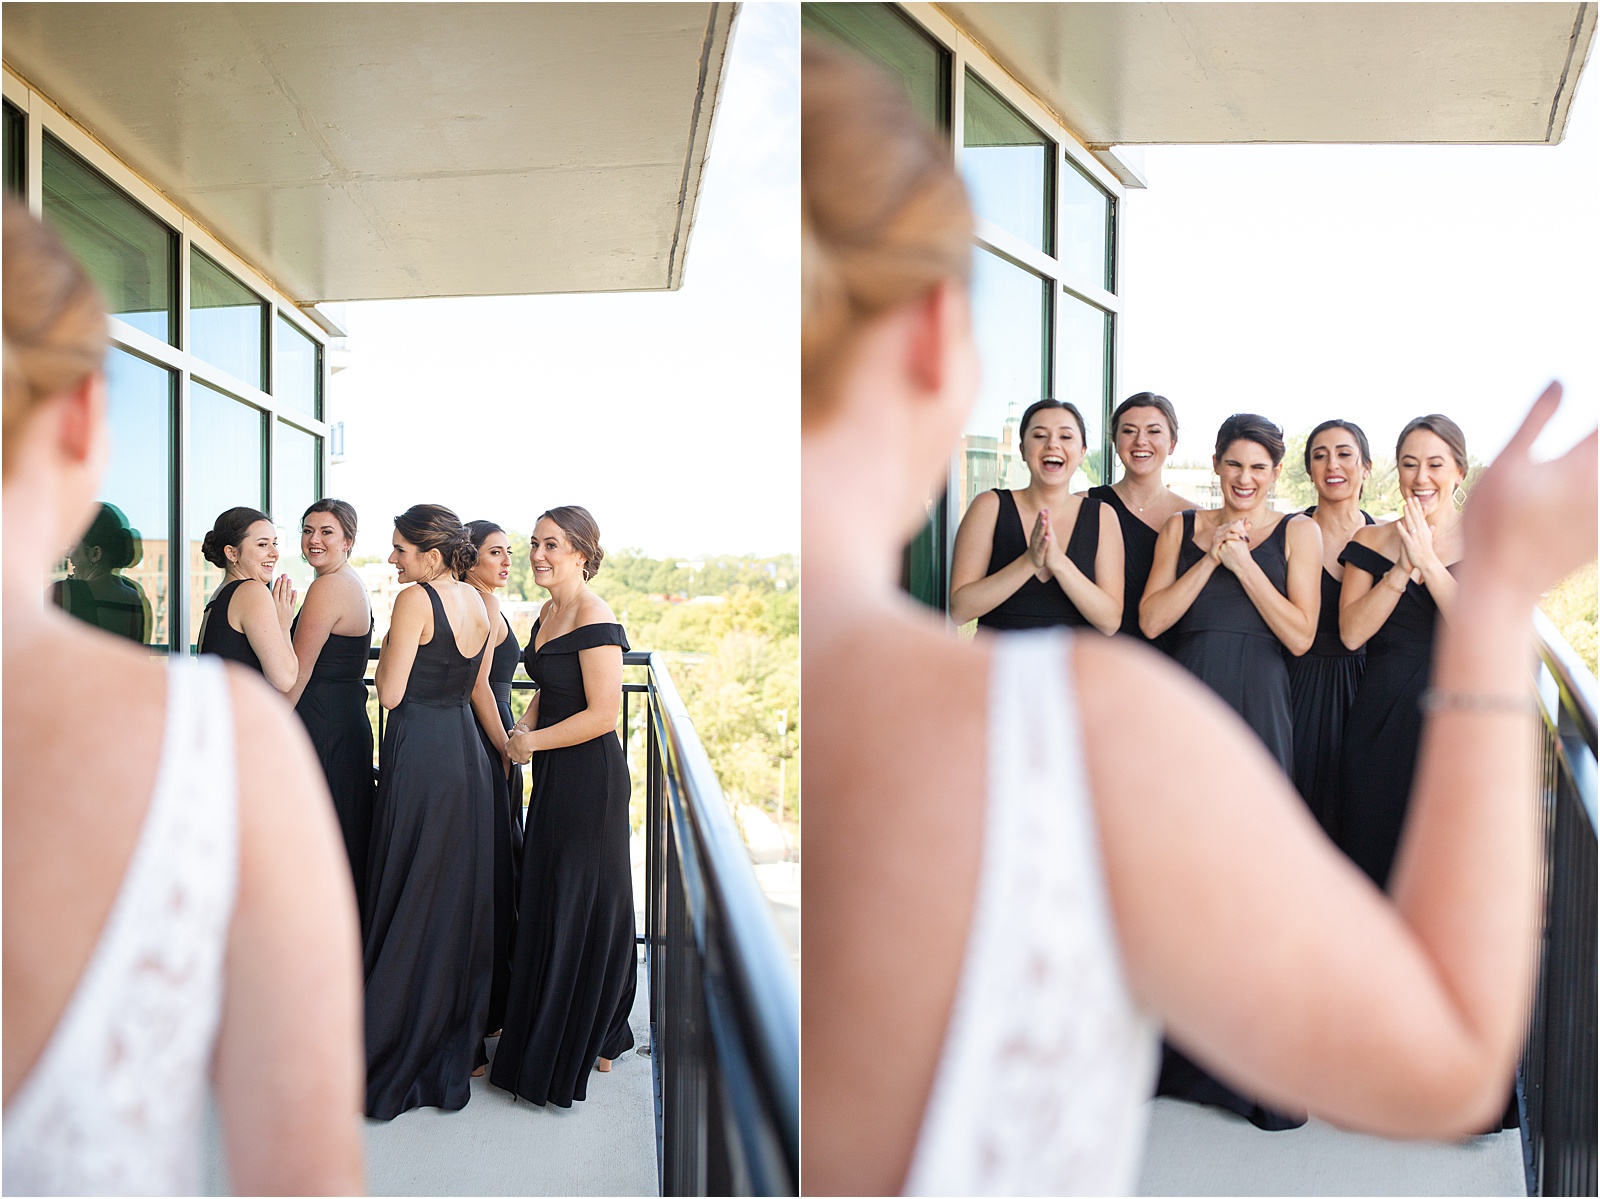 bridesmaids get a first look at the bride in her wedding dress